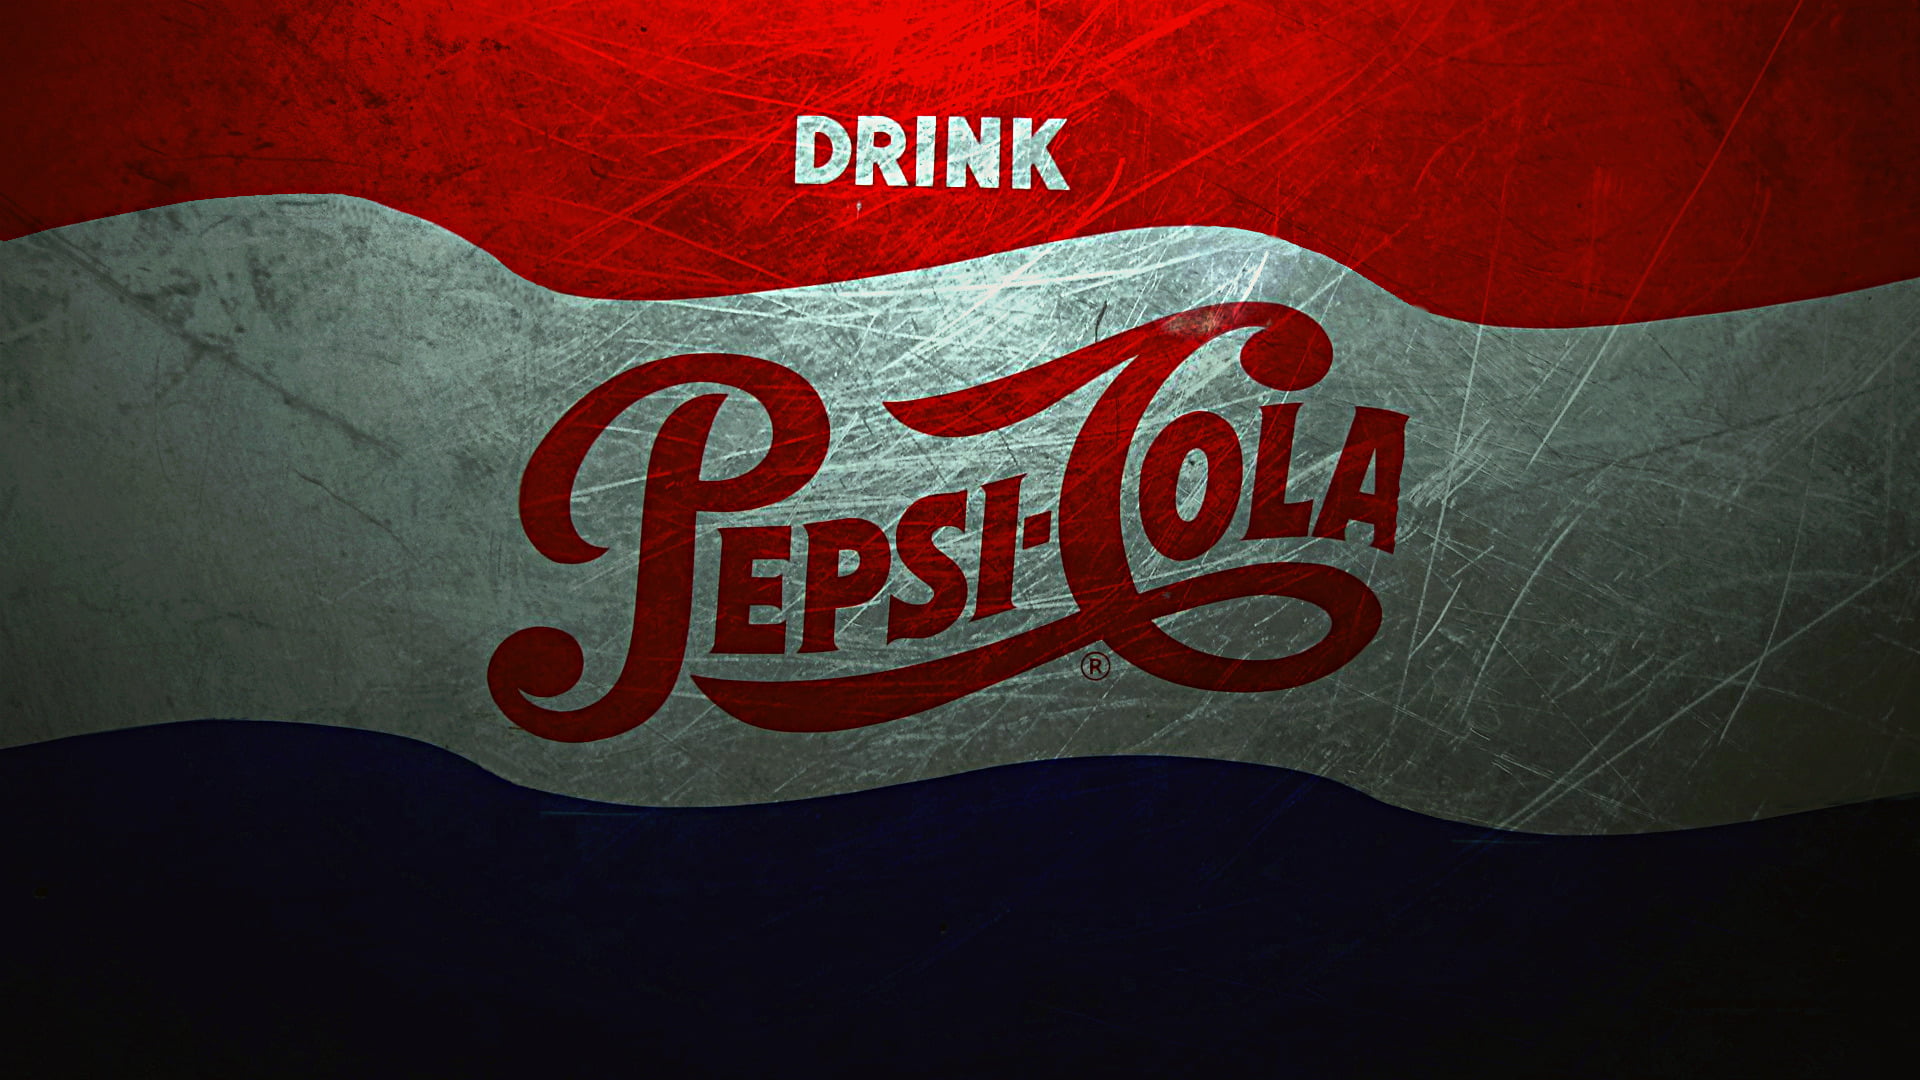 Products, Pepsi, text, red, communication, western script, close-up